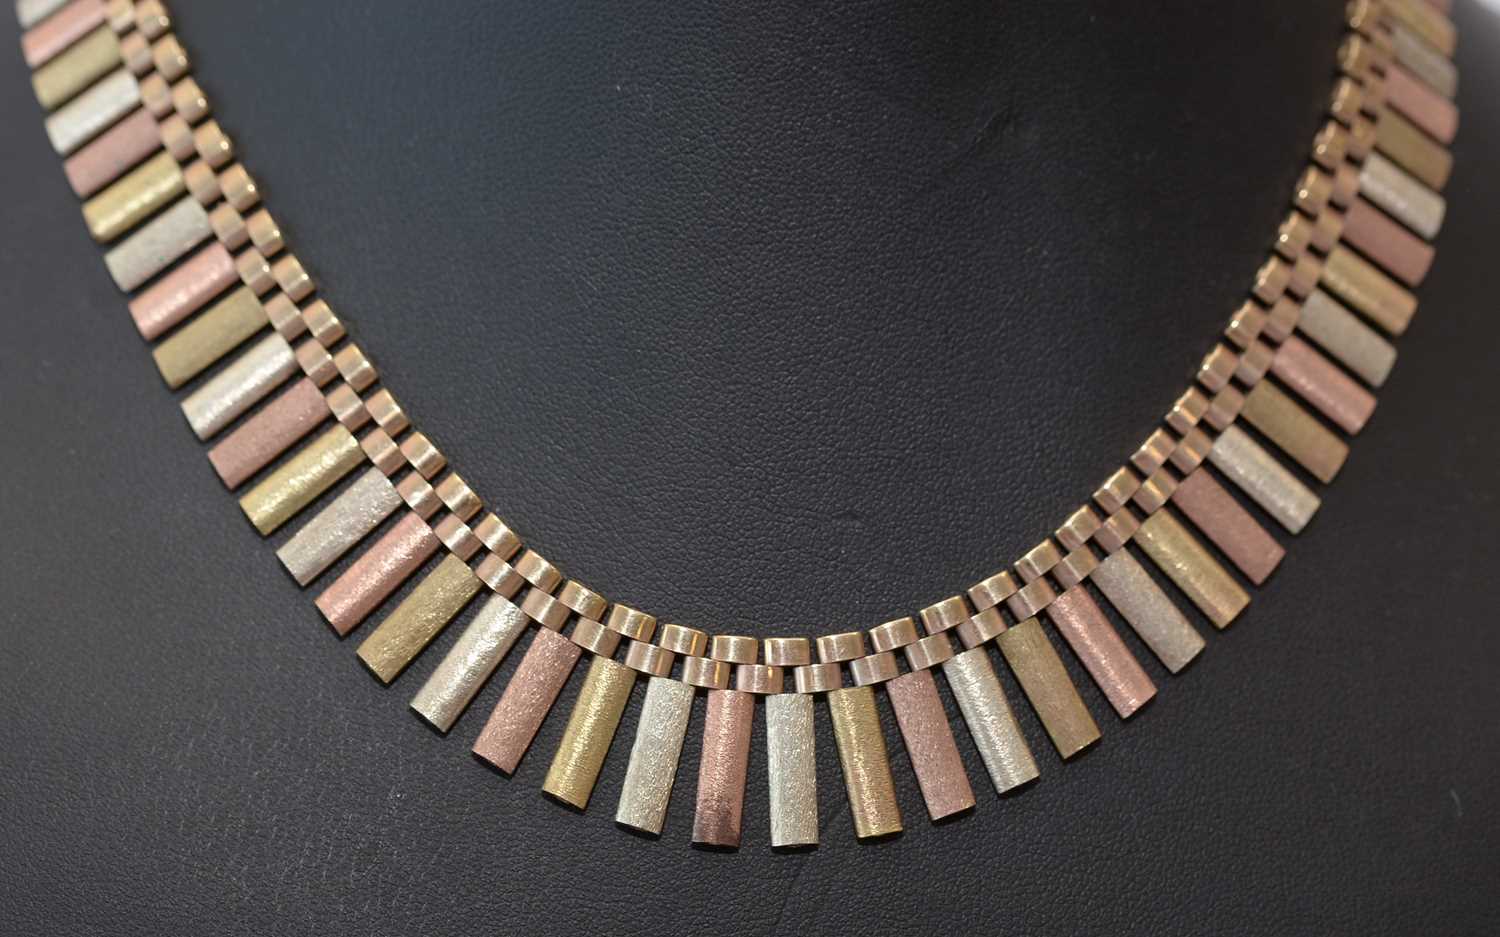 Lot 178 - 9ct yellow, white and rose gold fringe necklace